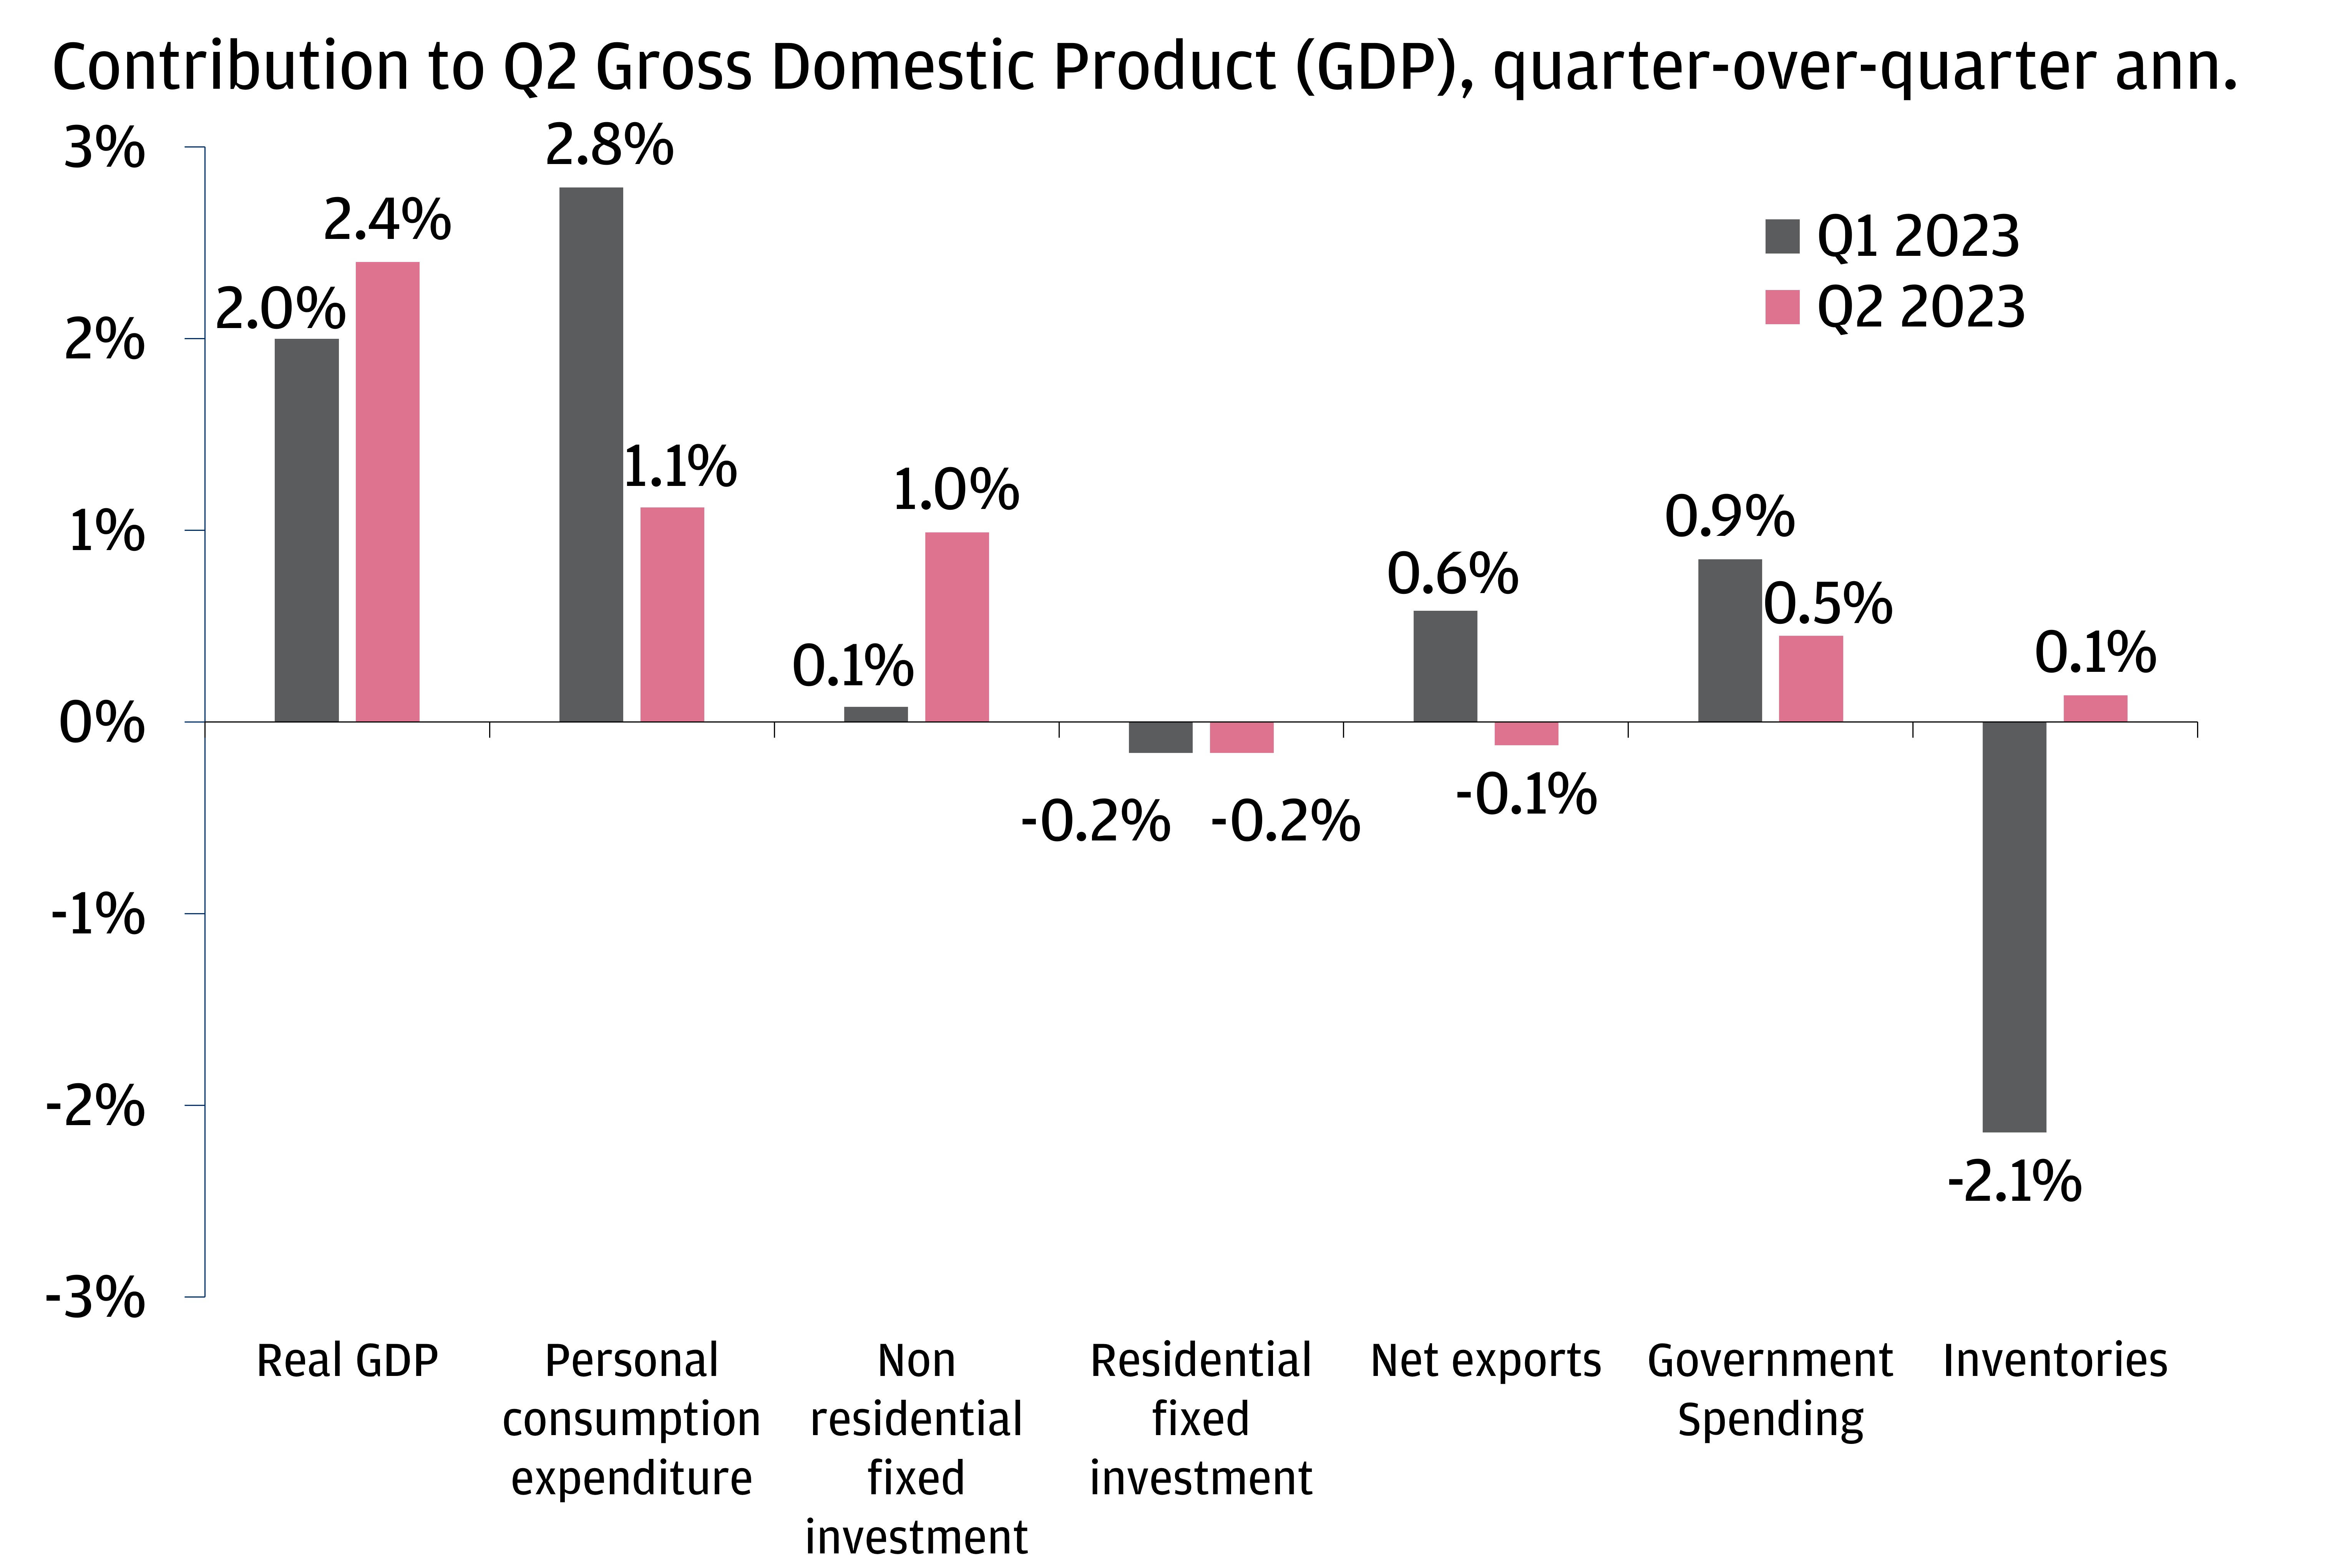 This bar chart shows the contribution by segment to U.S. Q2 Gross Domestic Product, quarter-over-quarter annualized.